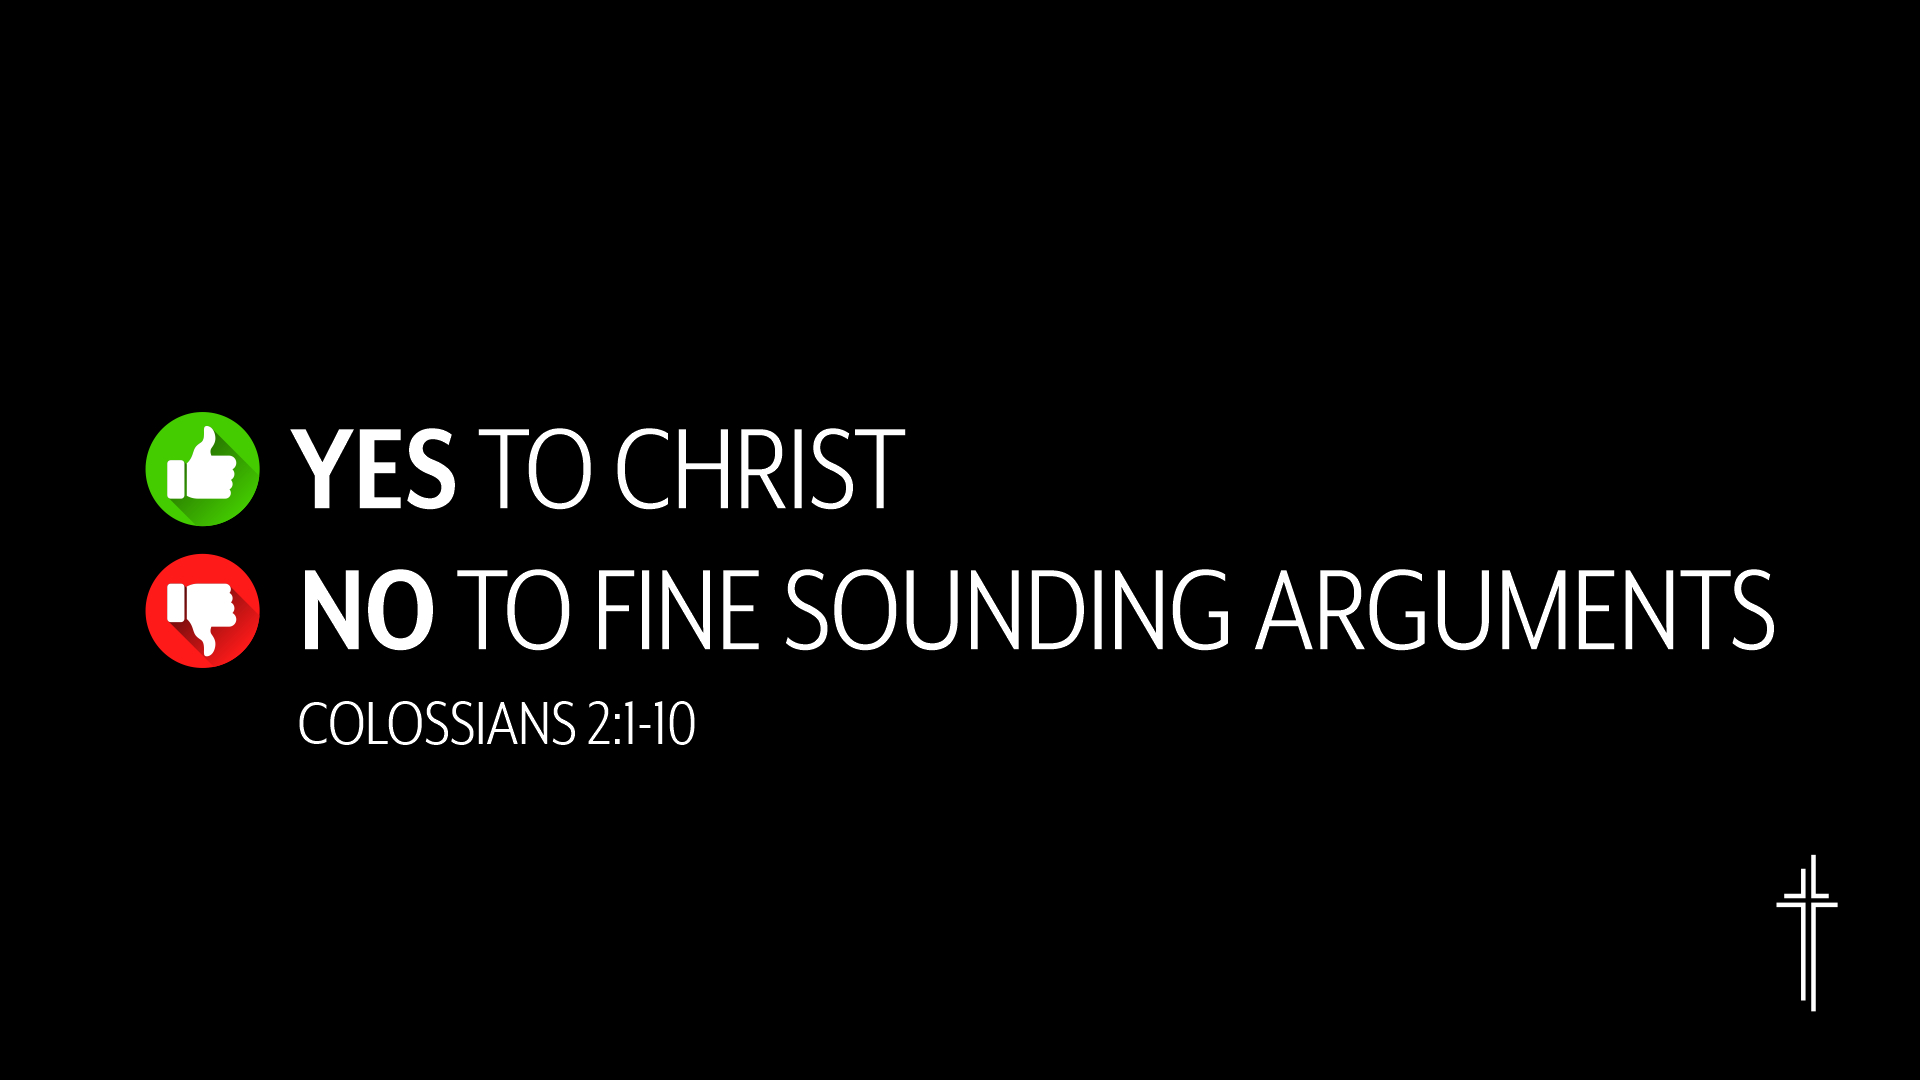 Yes to Christ, No to fine sounding arguments